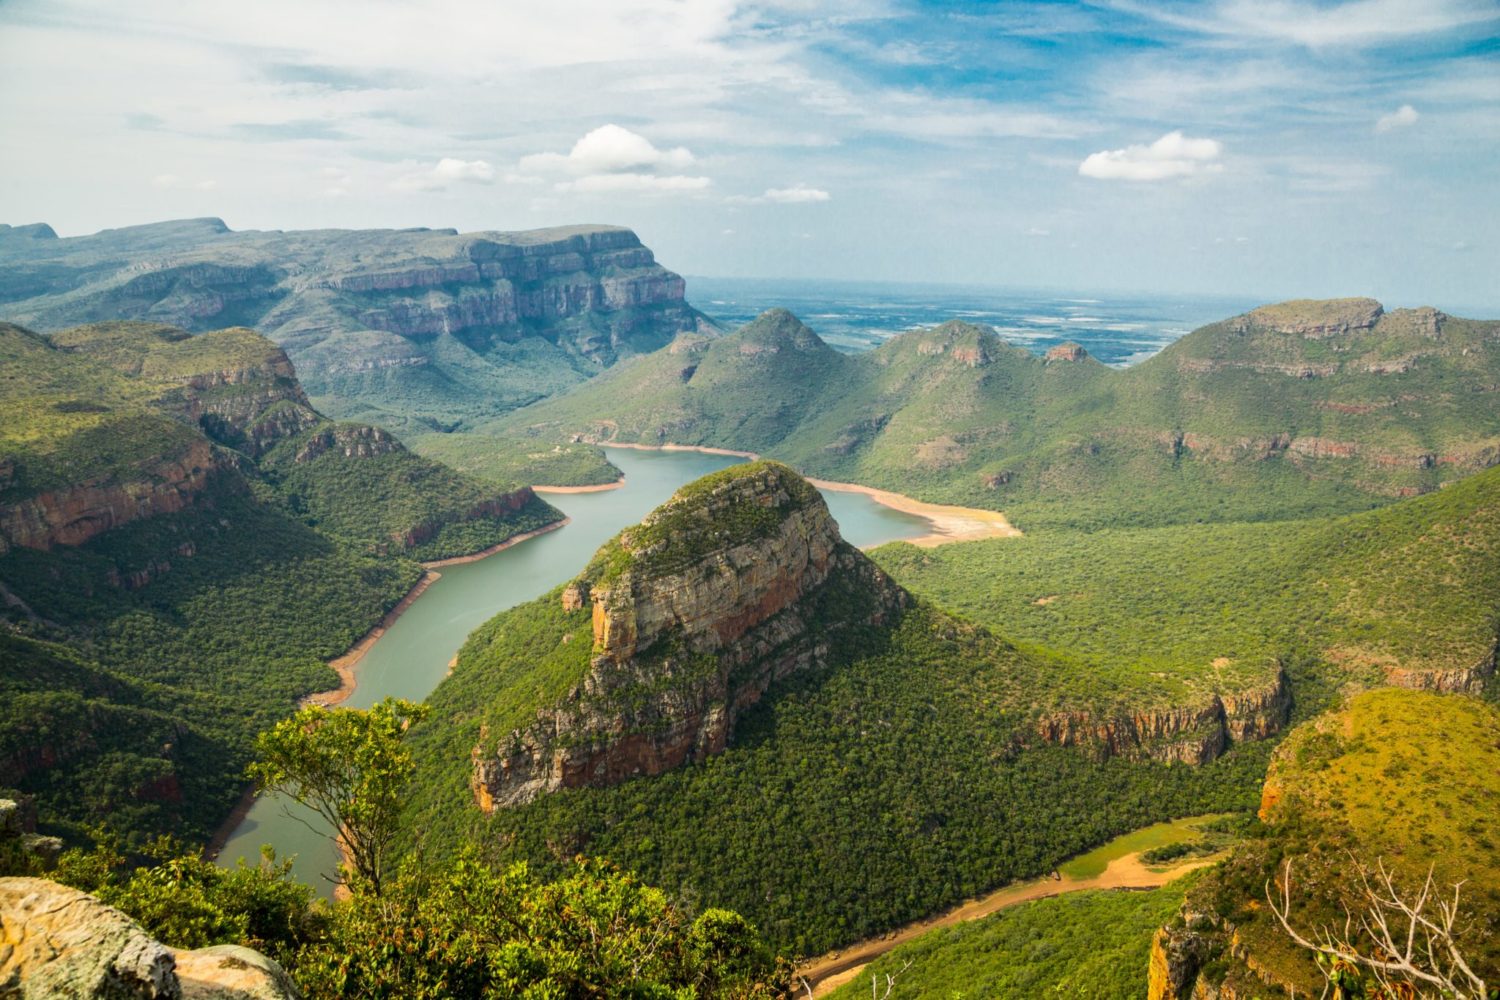 Aerial view of World's End, Blyde River Canyon